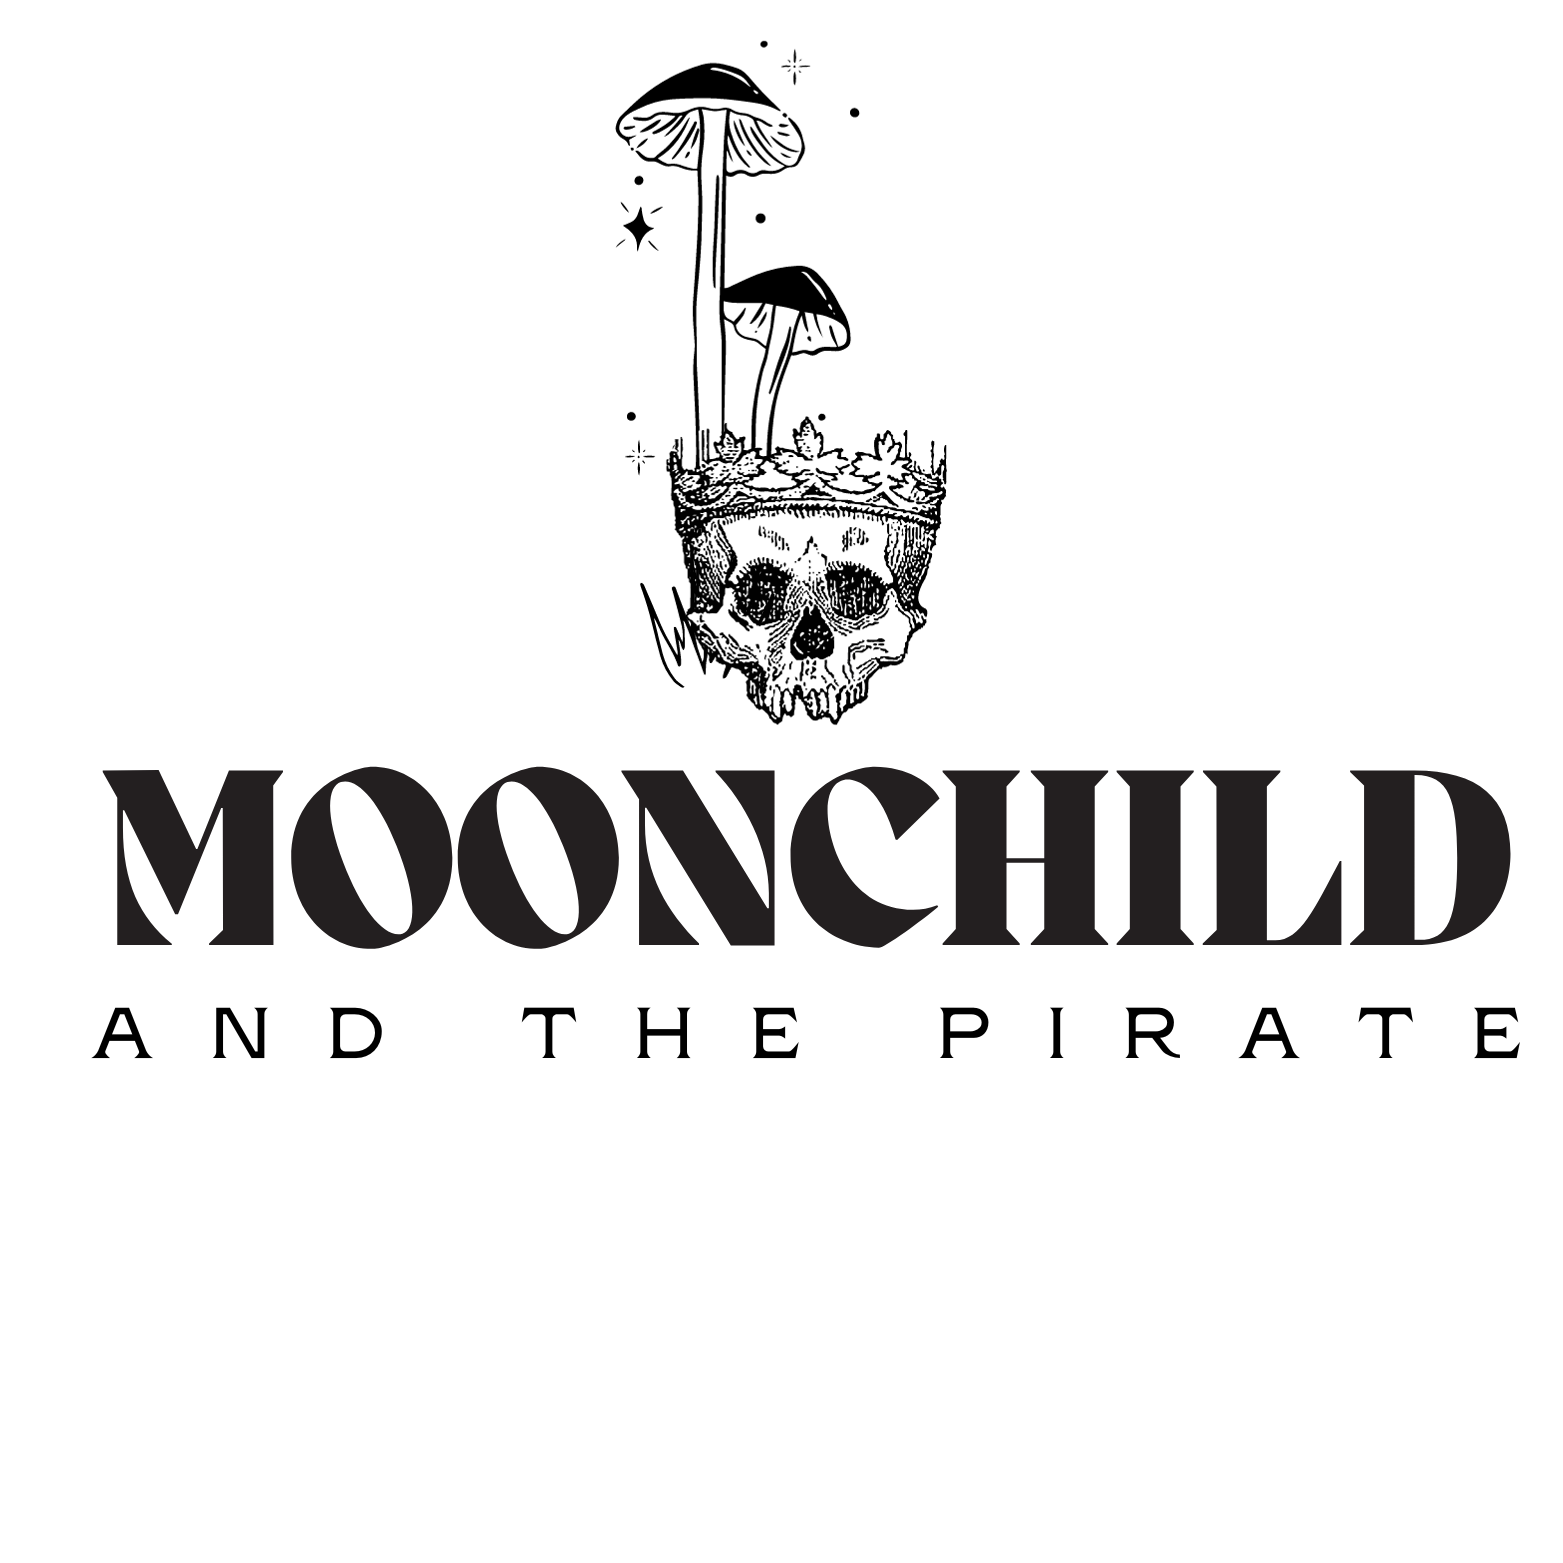 Moonchild and The Pirate